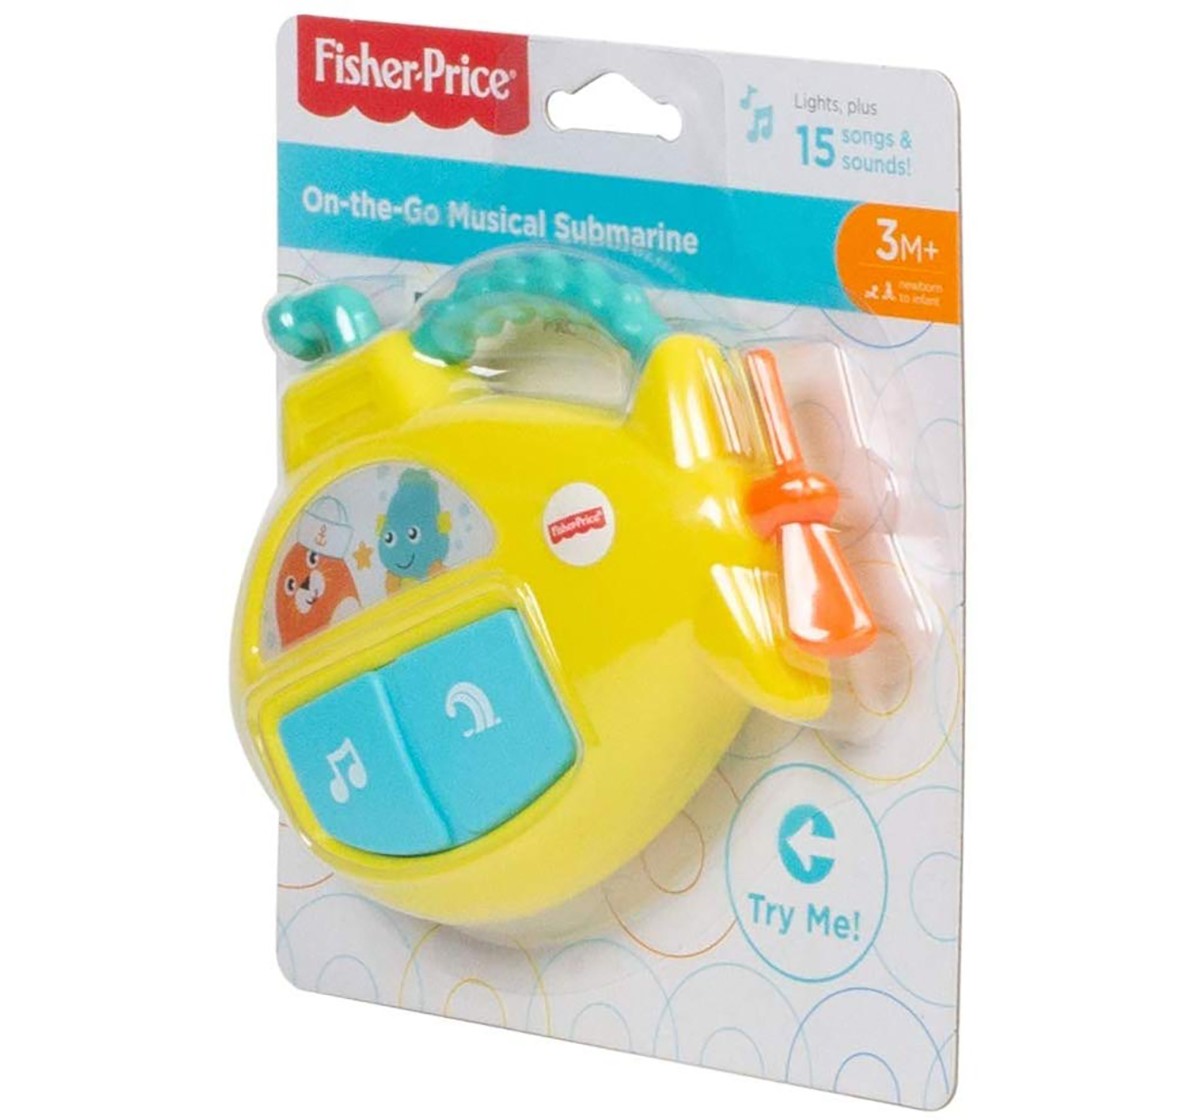 Fisher Price On The Go Musical Submarine Musical Toys for Kids age 3Y+ 